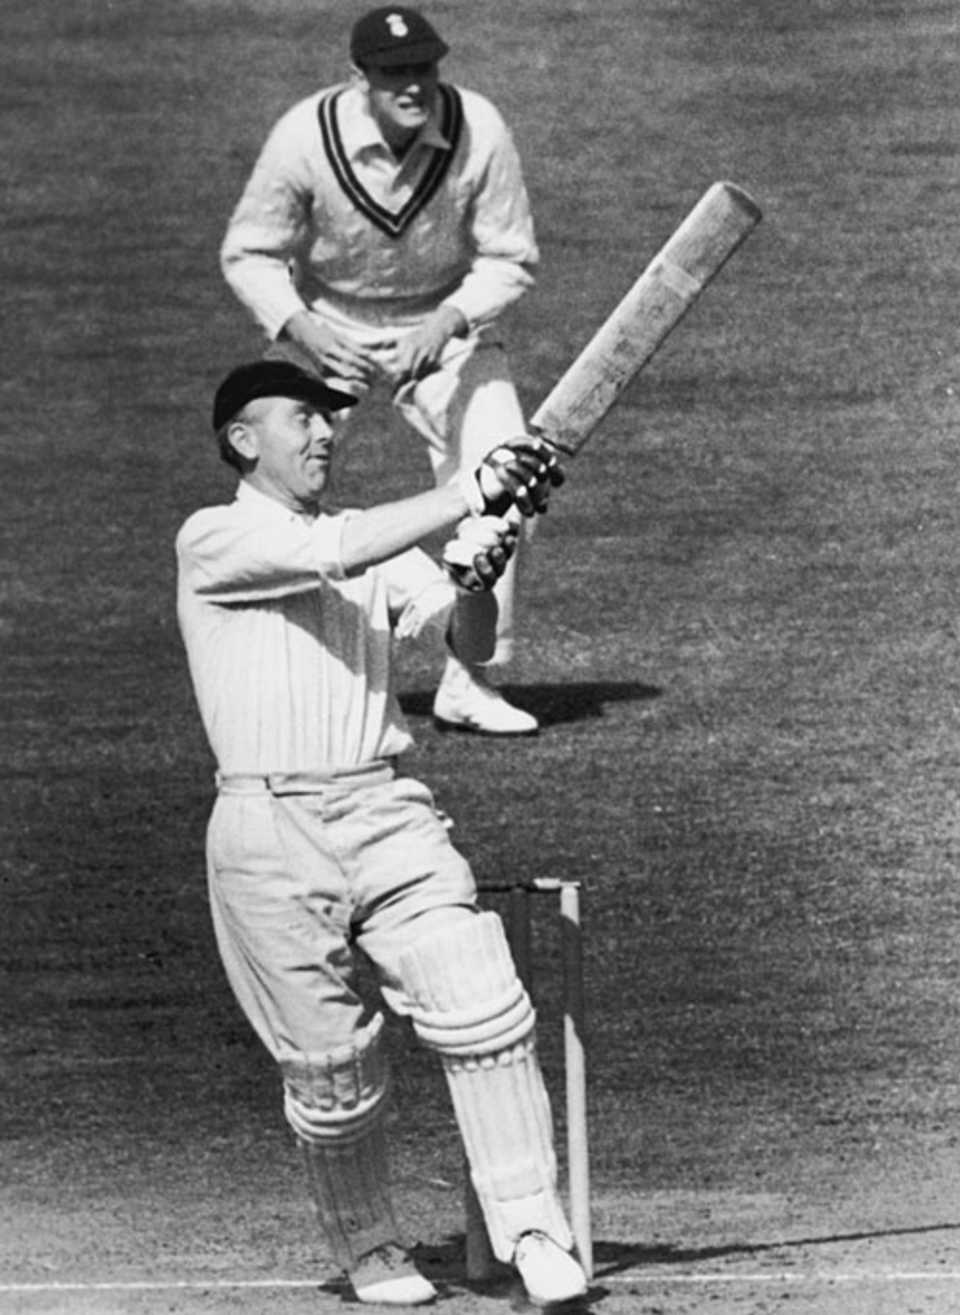 Winston Place swerves while playing the pull shot, Surrey v Lancashire, County Championship, 3rd day, The Oval, August 29, 1950